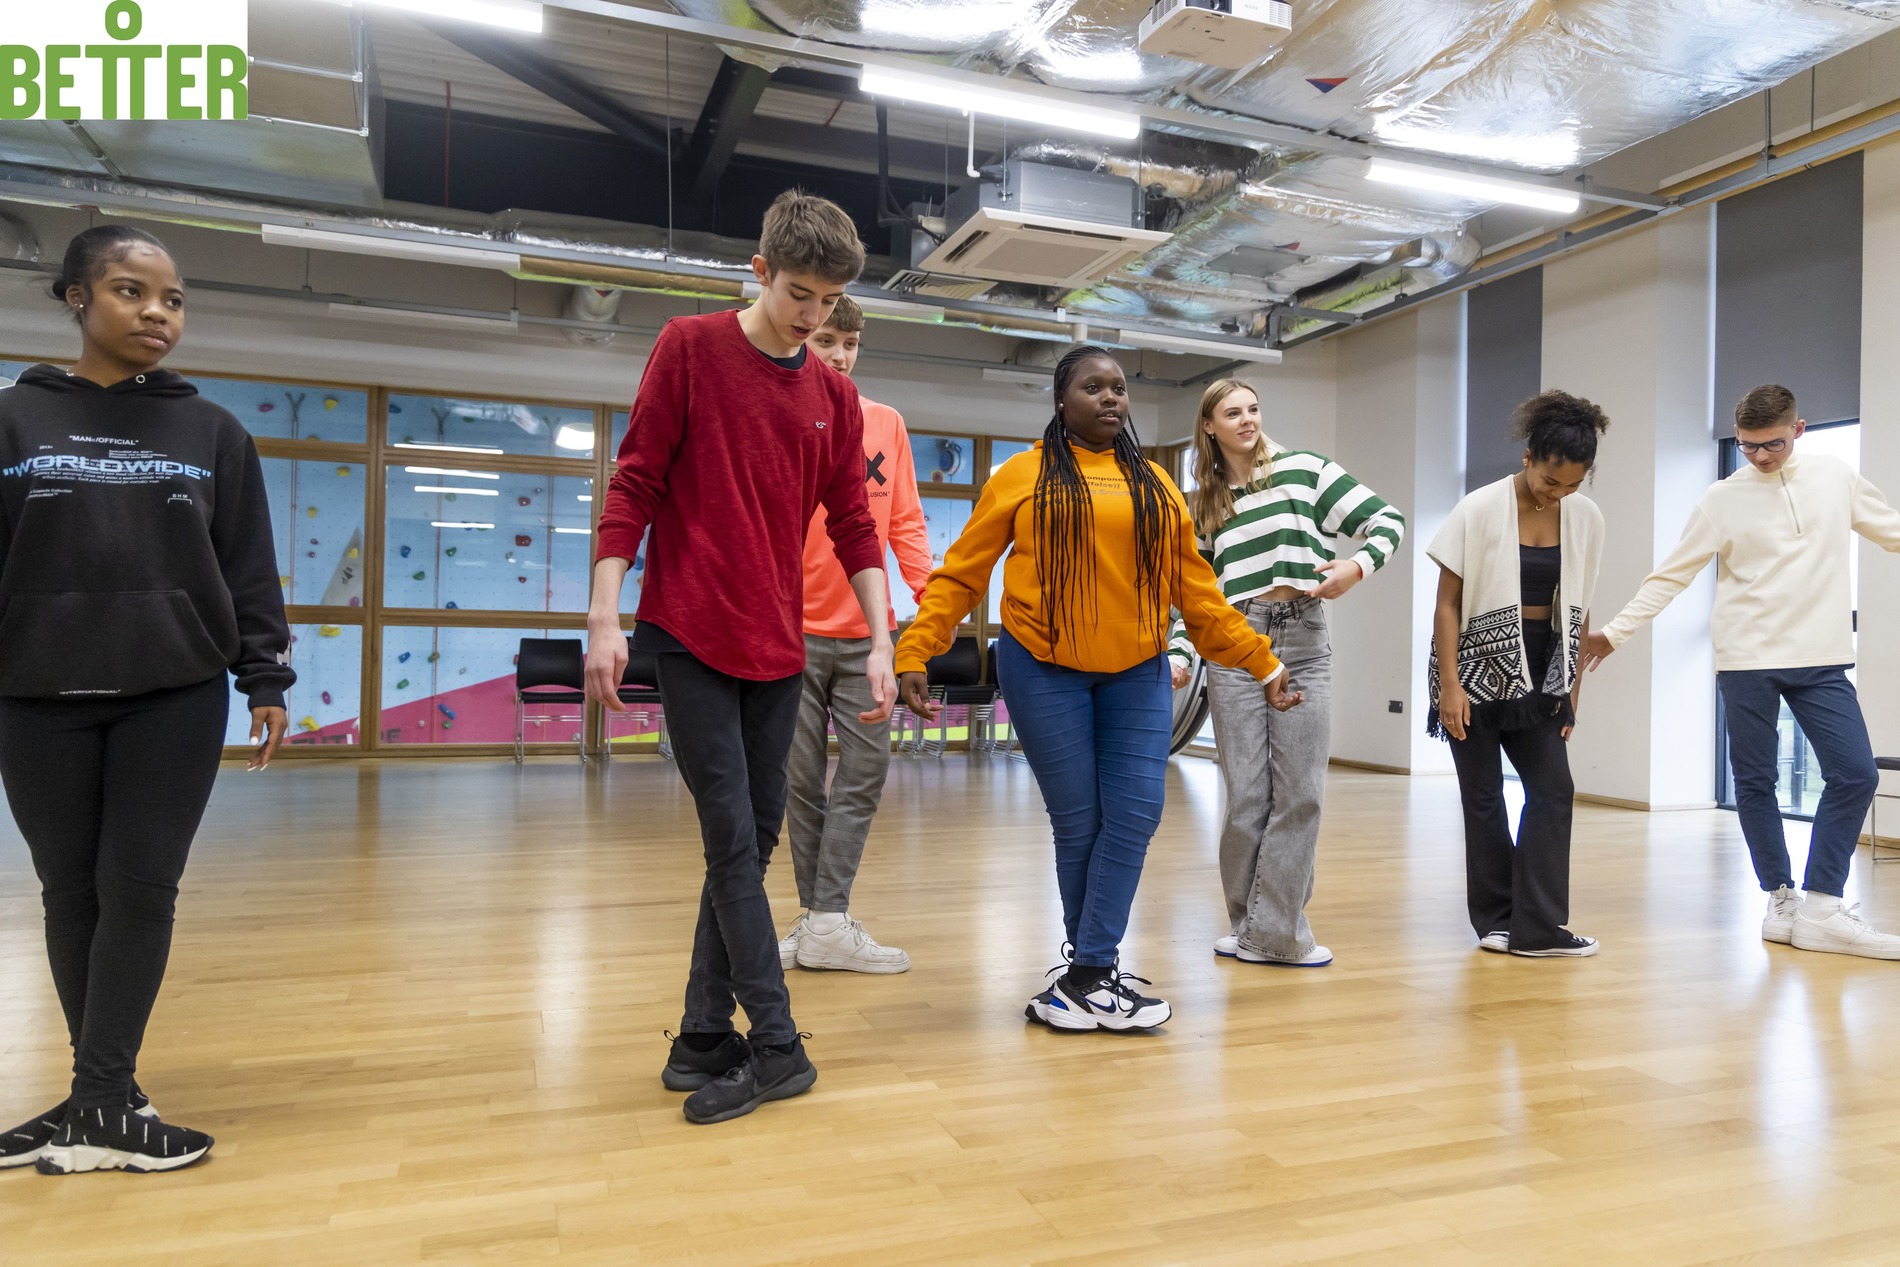 A group of young people practice a dance routine in a sports hall